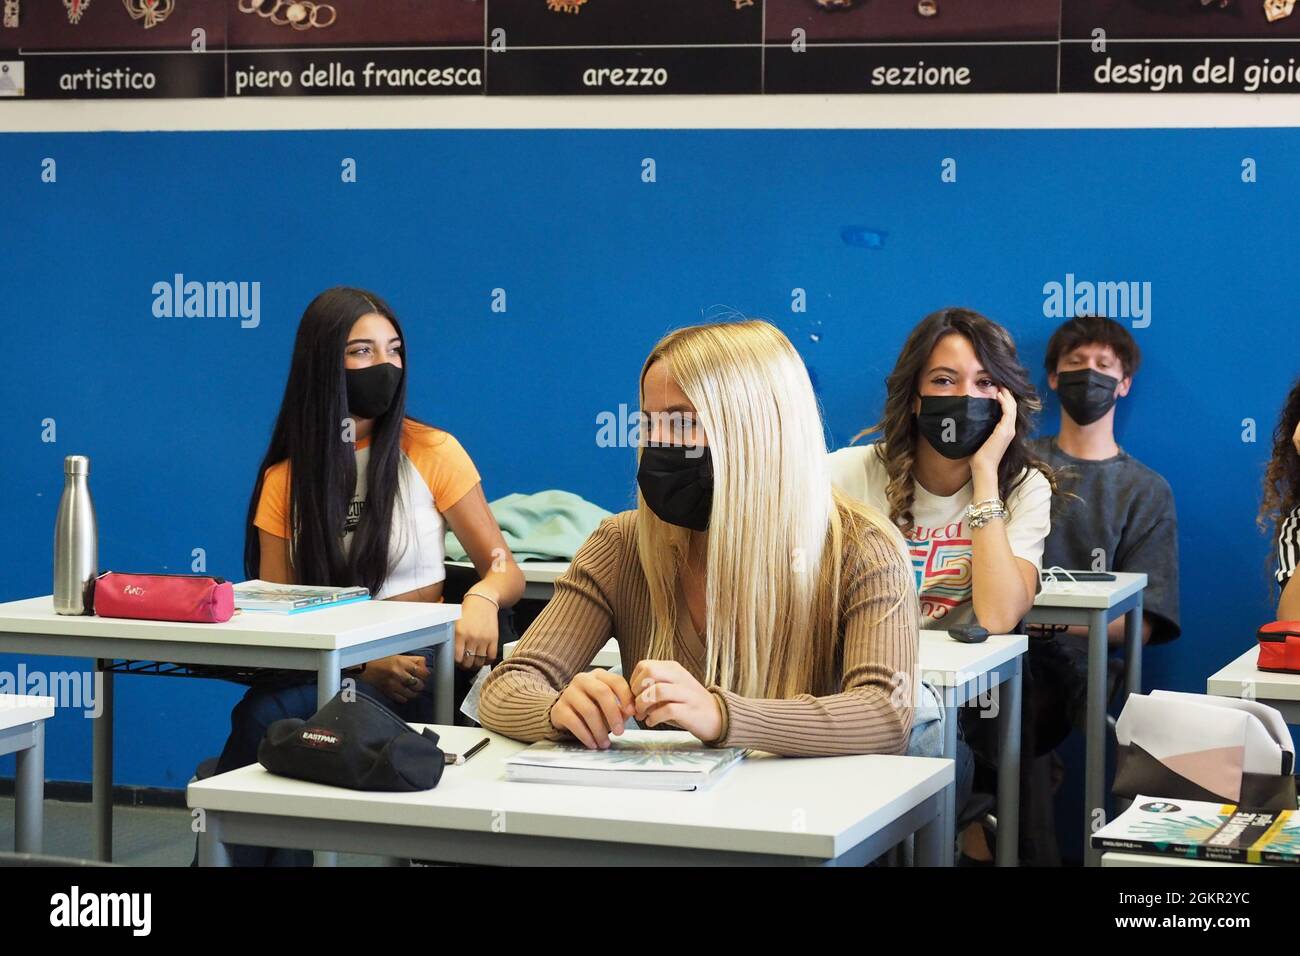 Italy, Tuscany region, Arezzo, September 15, 2021 : Covid emergency, the first day of school. Piero della Francesca artistic high school. The reopening of schools, after a period of summer holiday.    Photo © Daiano Cristini/Sintesi/Alamy Live News Stock Photo